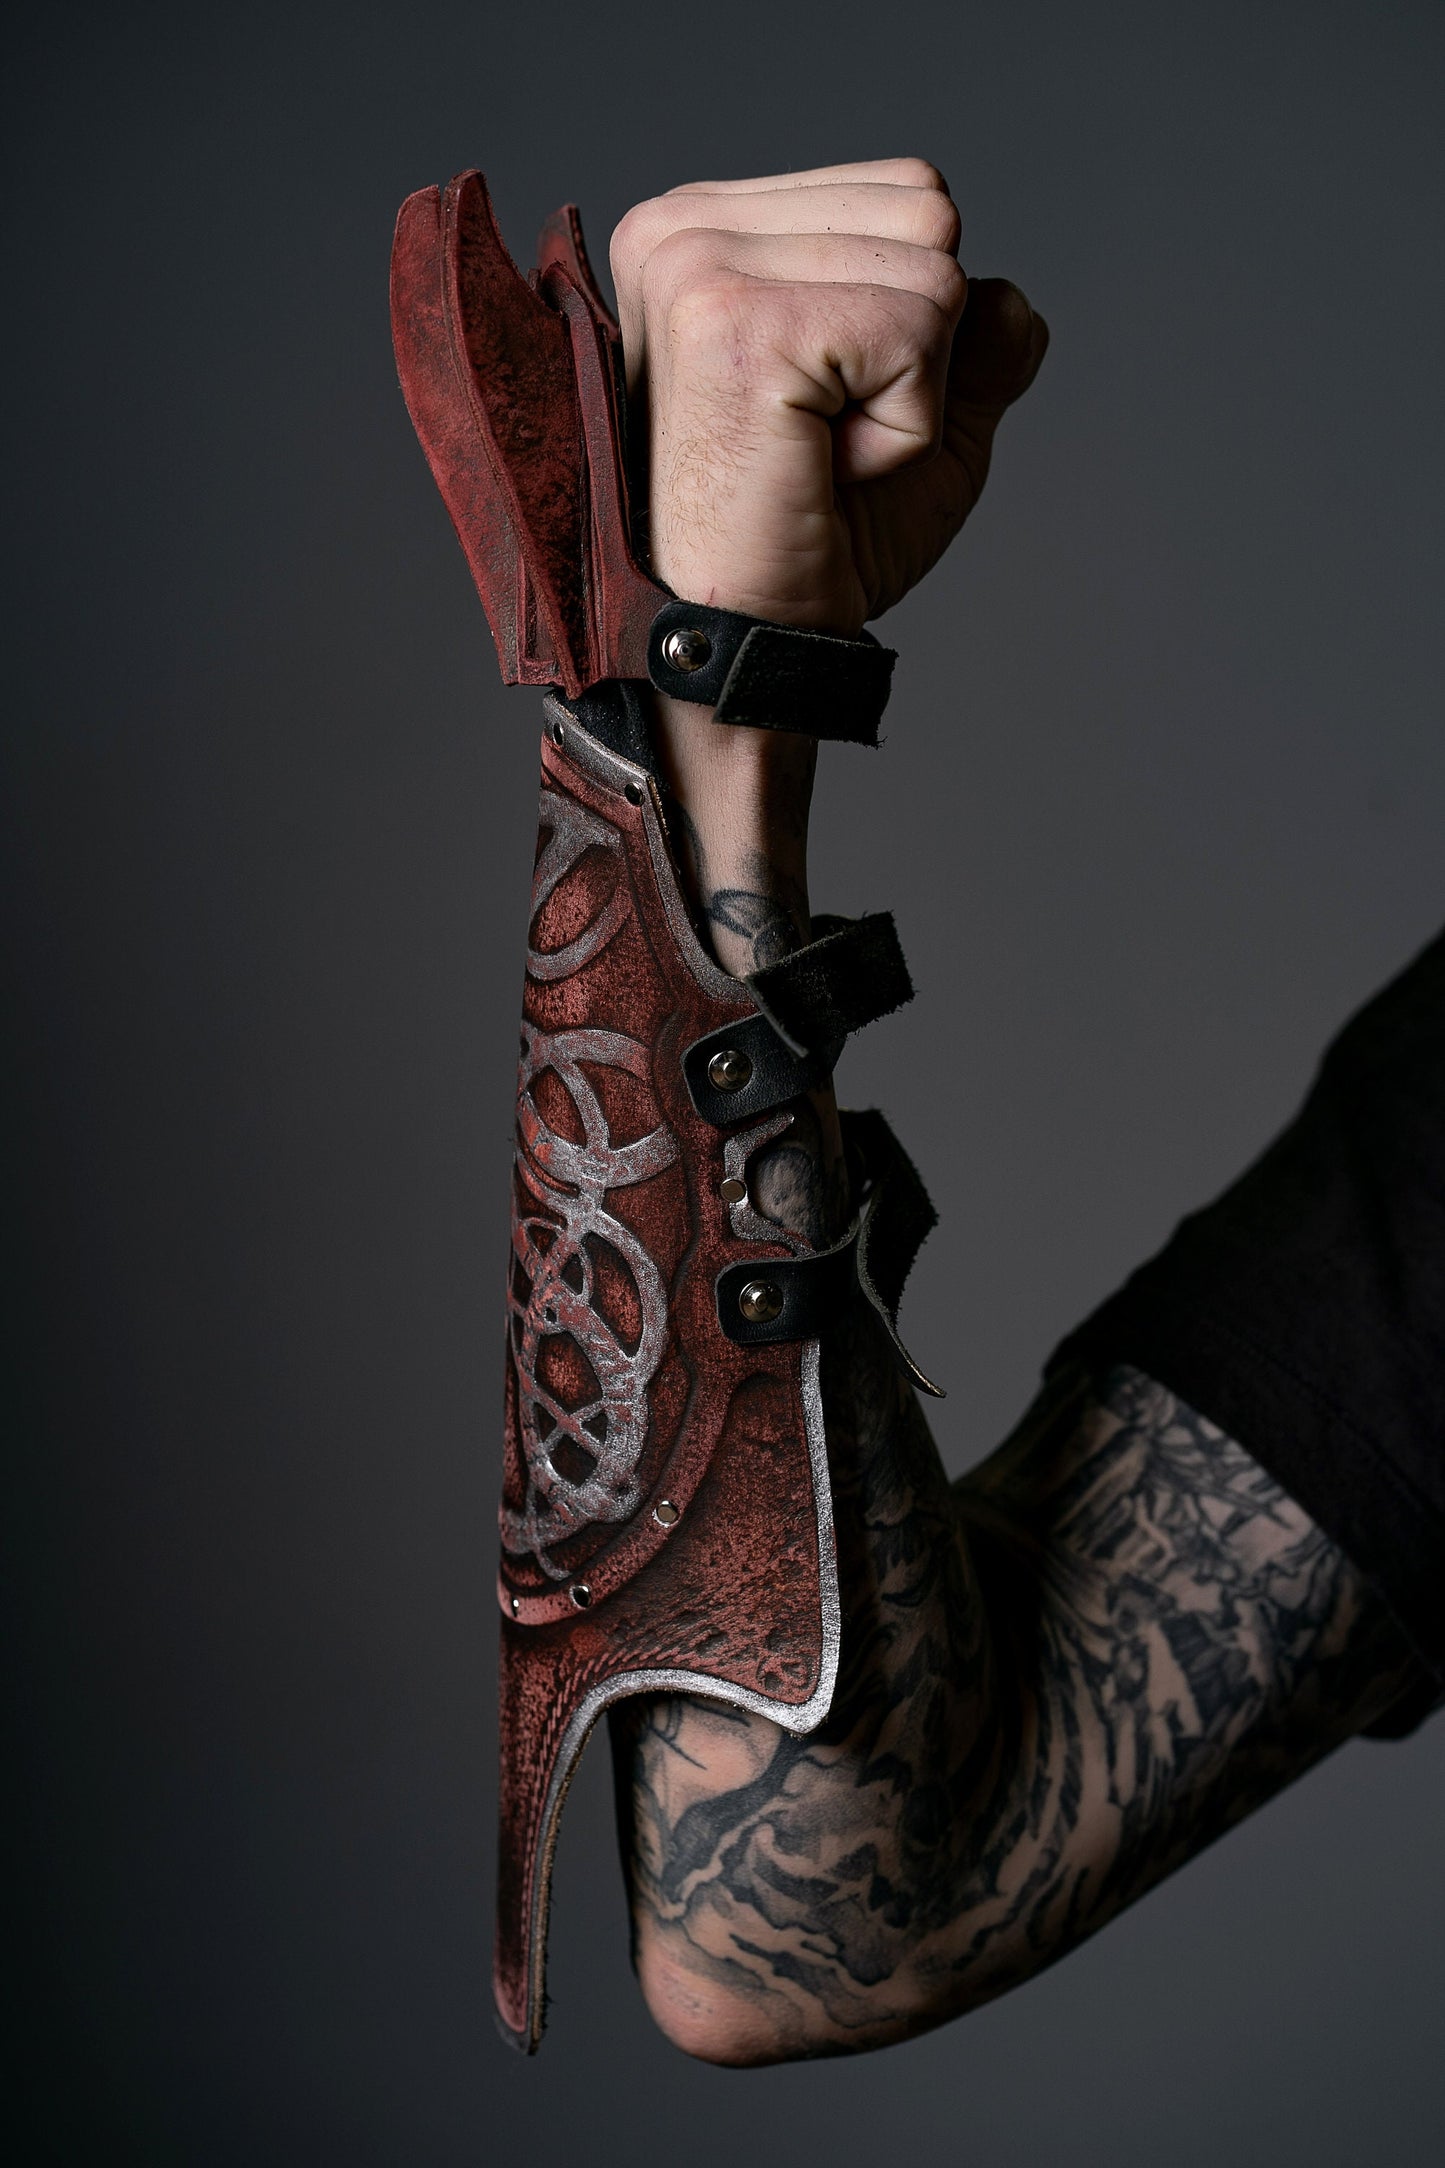 Kratos bracers with claws (God of War)